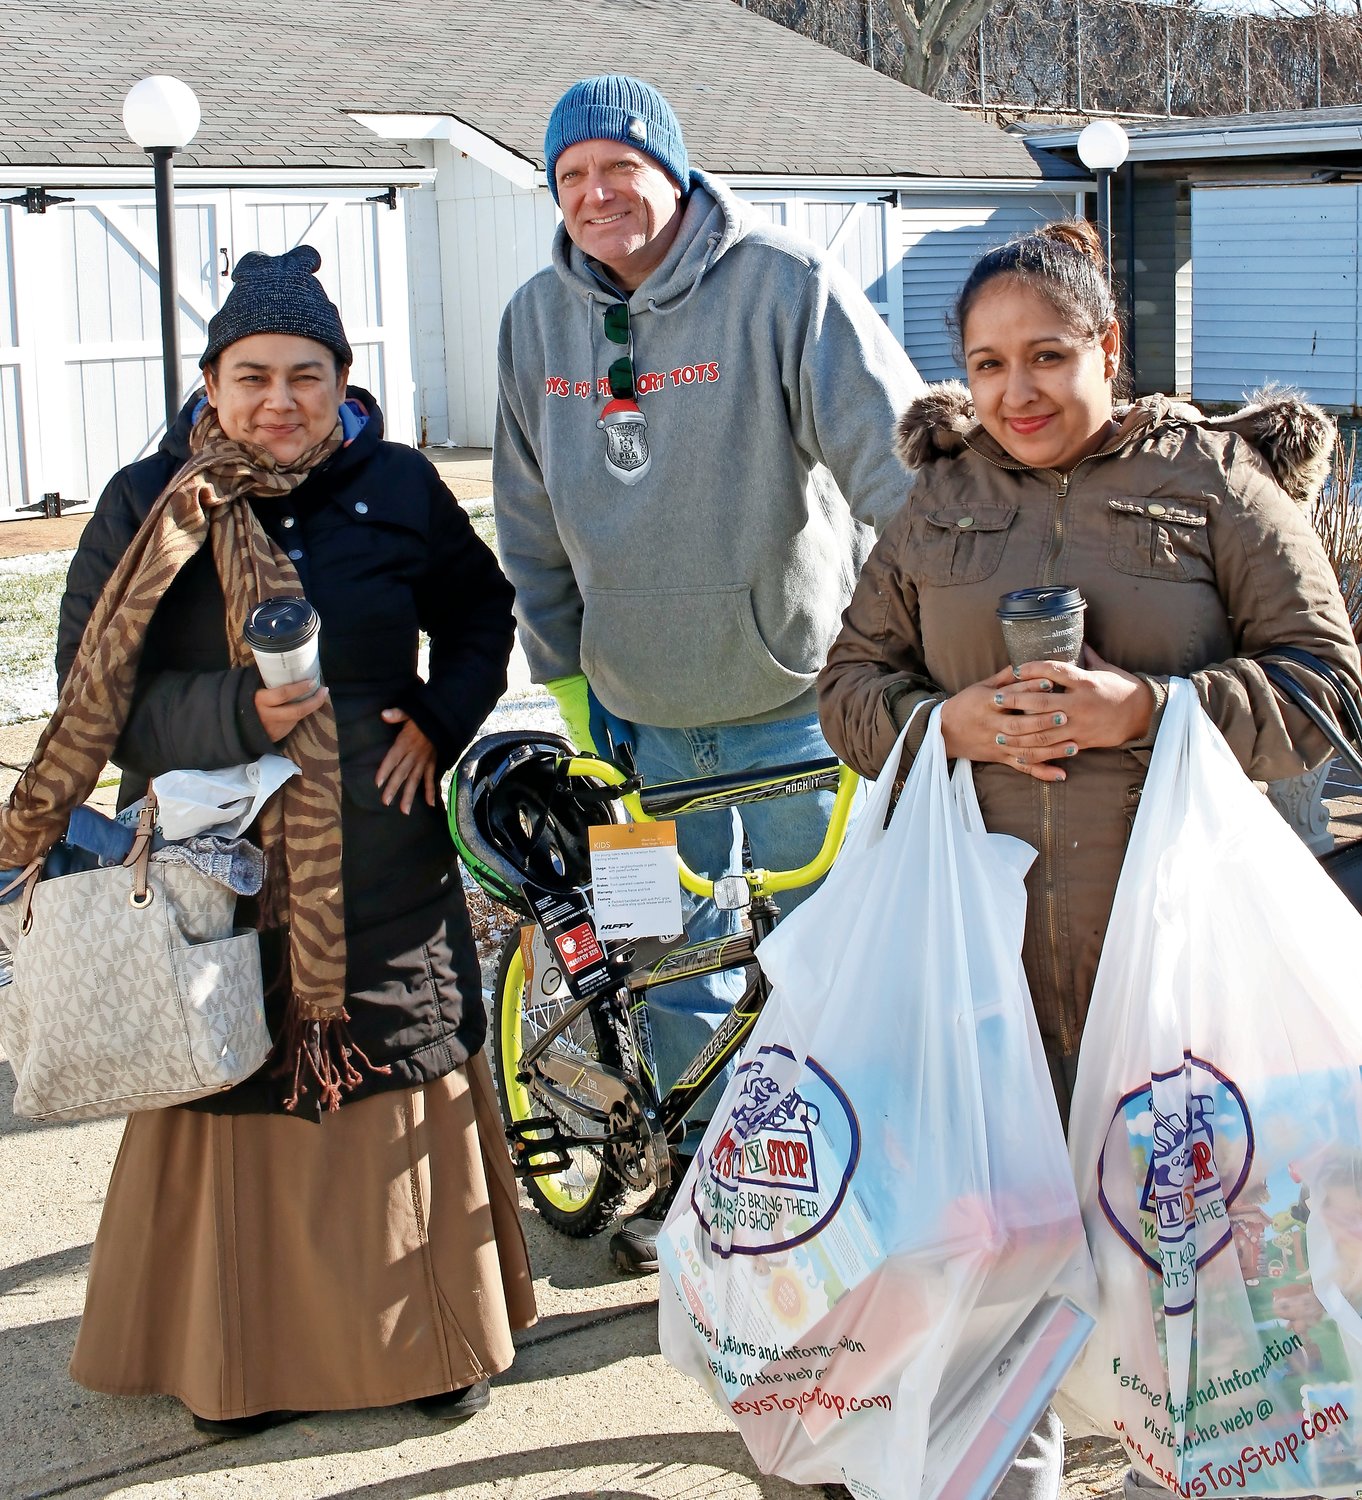 Franzone, center, brought a bike to Marlana Recen-Hernandez, left, for her son. Her friend Amalia Argueta, right, helped her carry a bags of toys to her car.